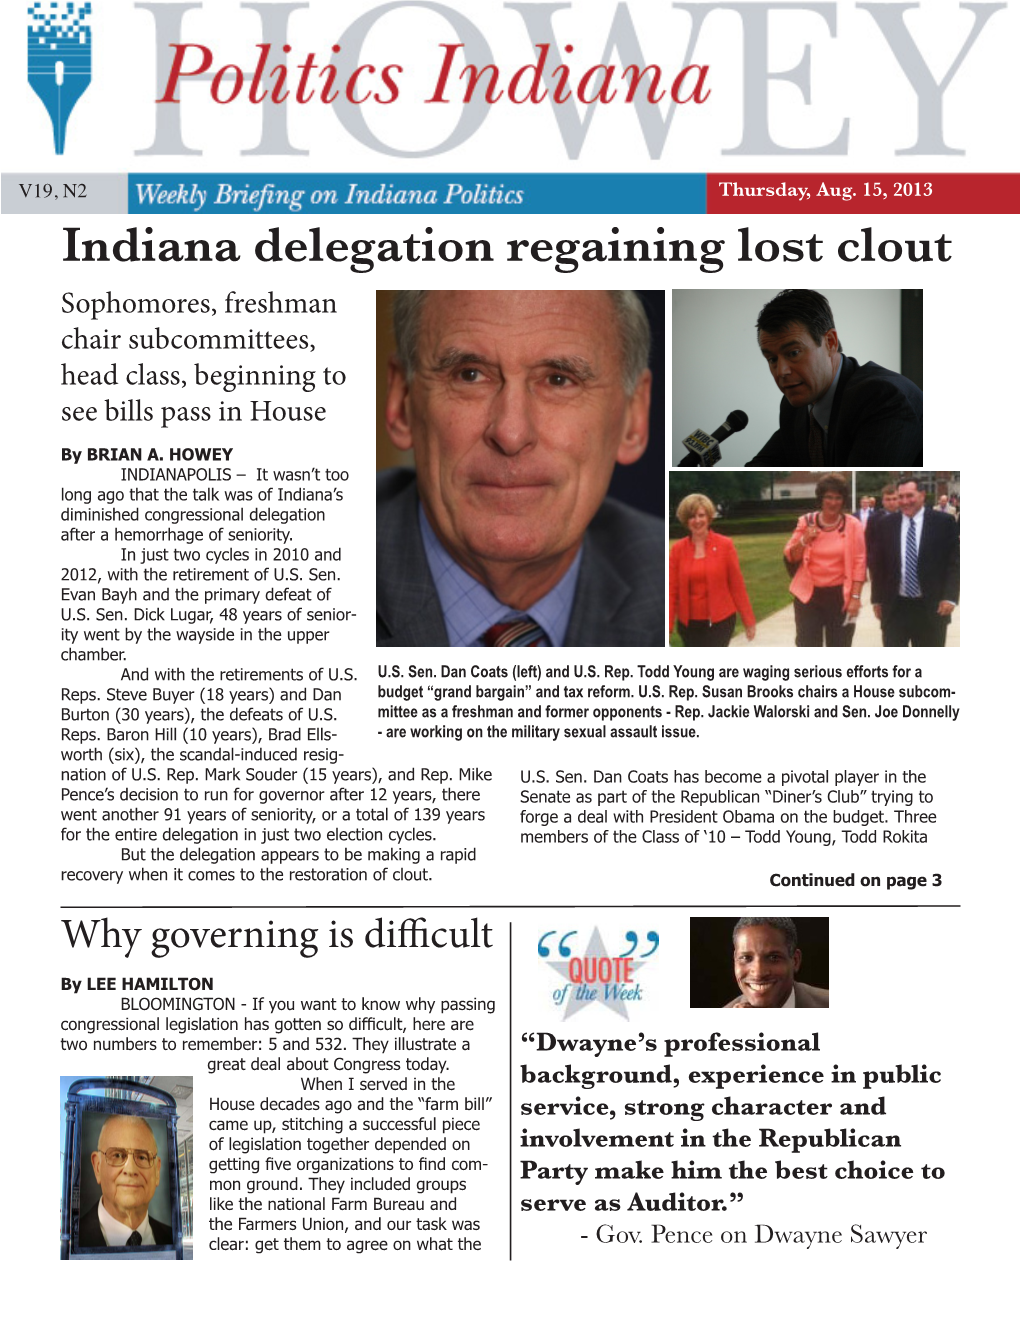 Indiana Delegation Regaining Lost Clout Sophomores, Freshman Chair Subcommittees, Head Class, Beginning to See Bills Pass in House by BRIAN A